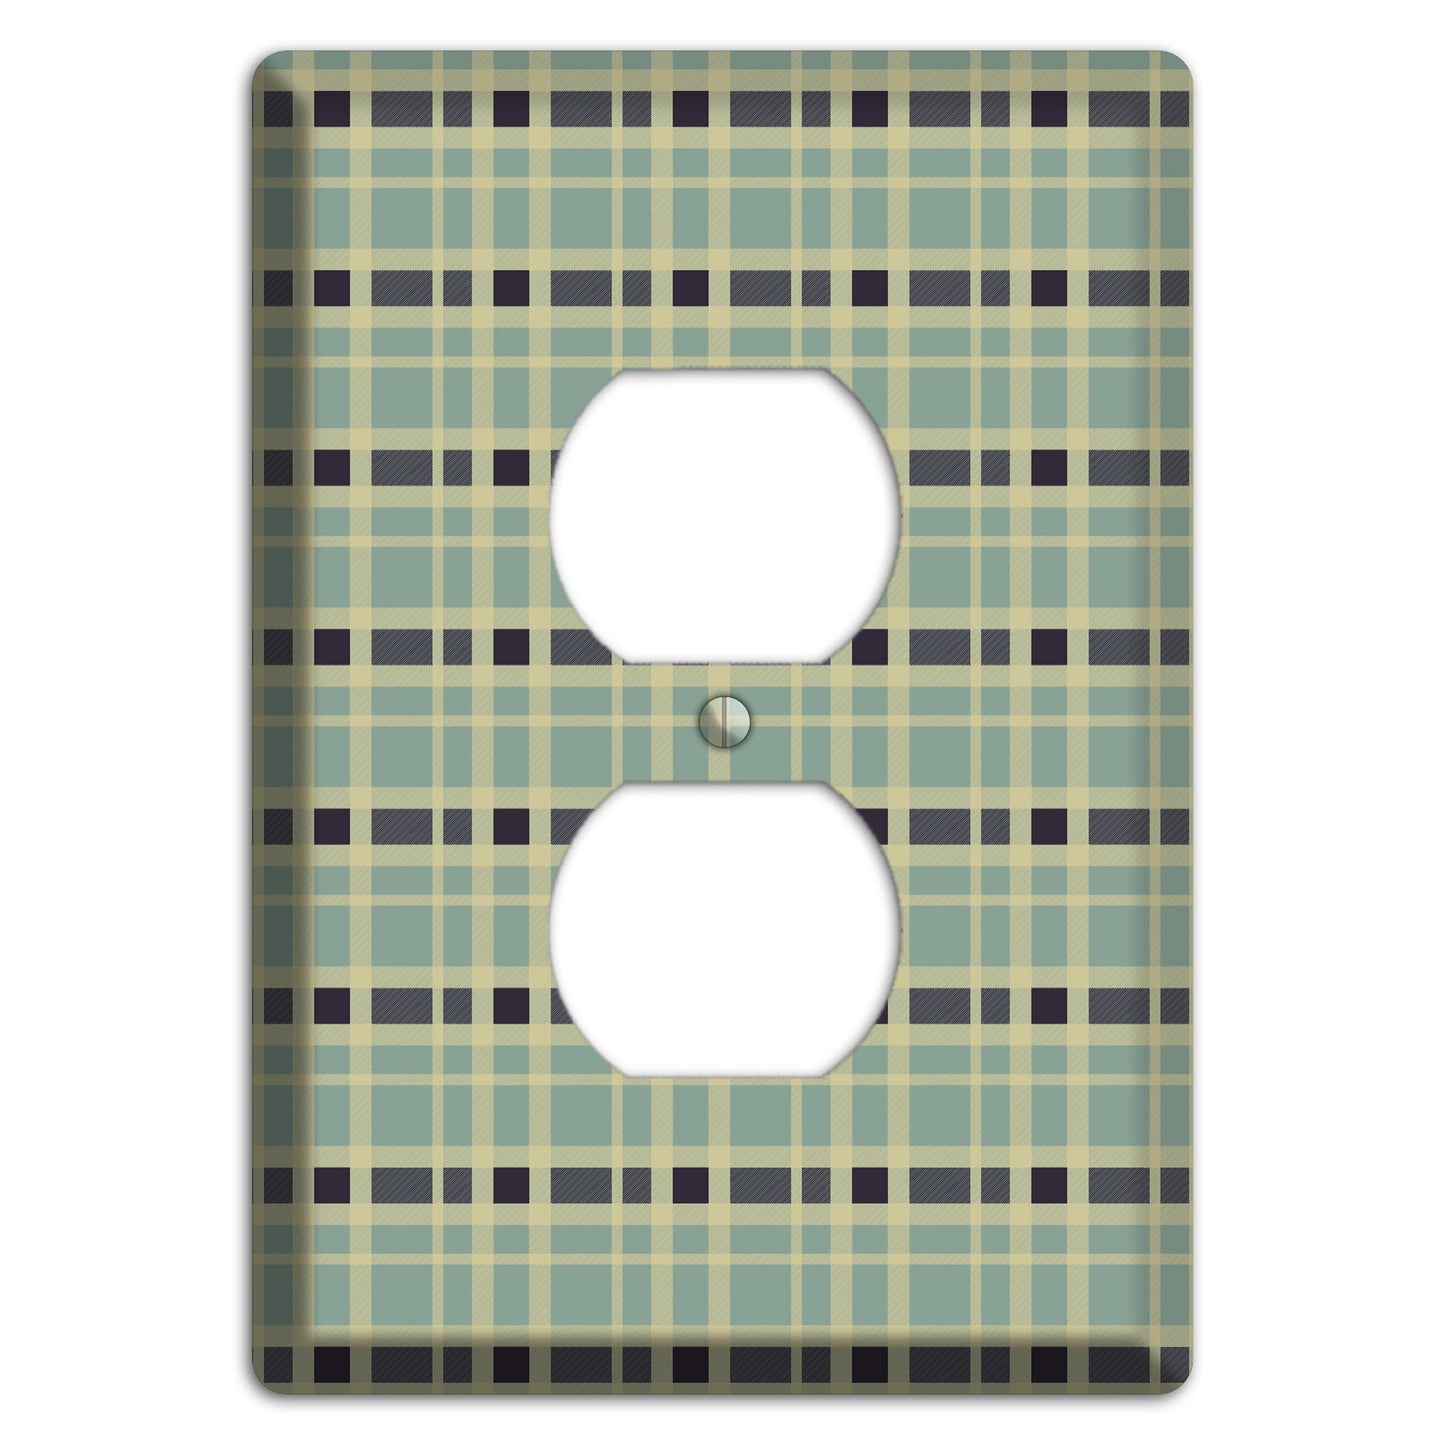 Sage and Black Plaid Duplex Outlet Wallplate